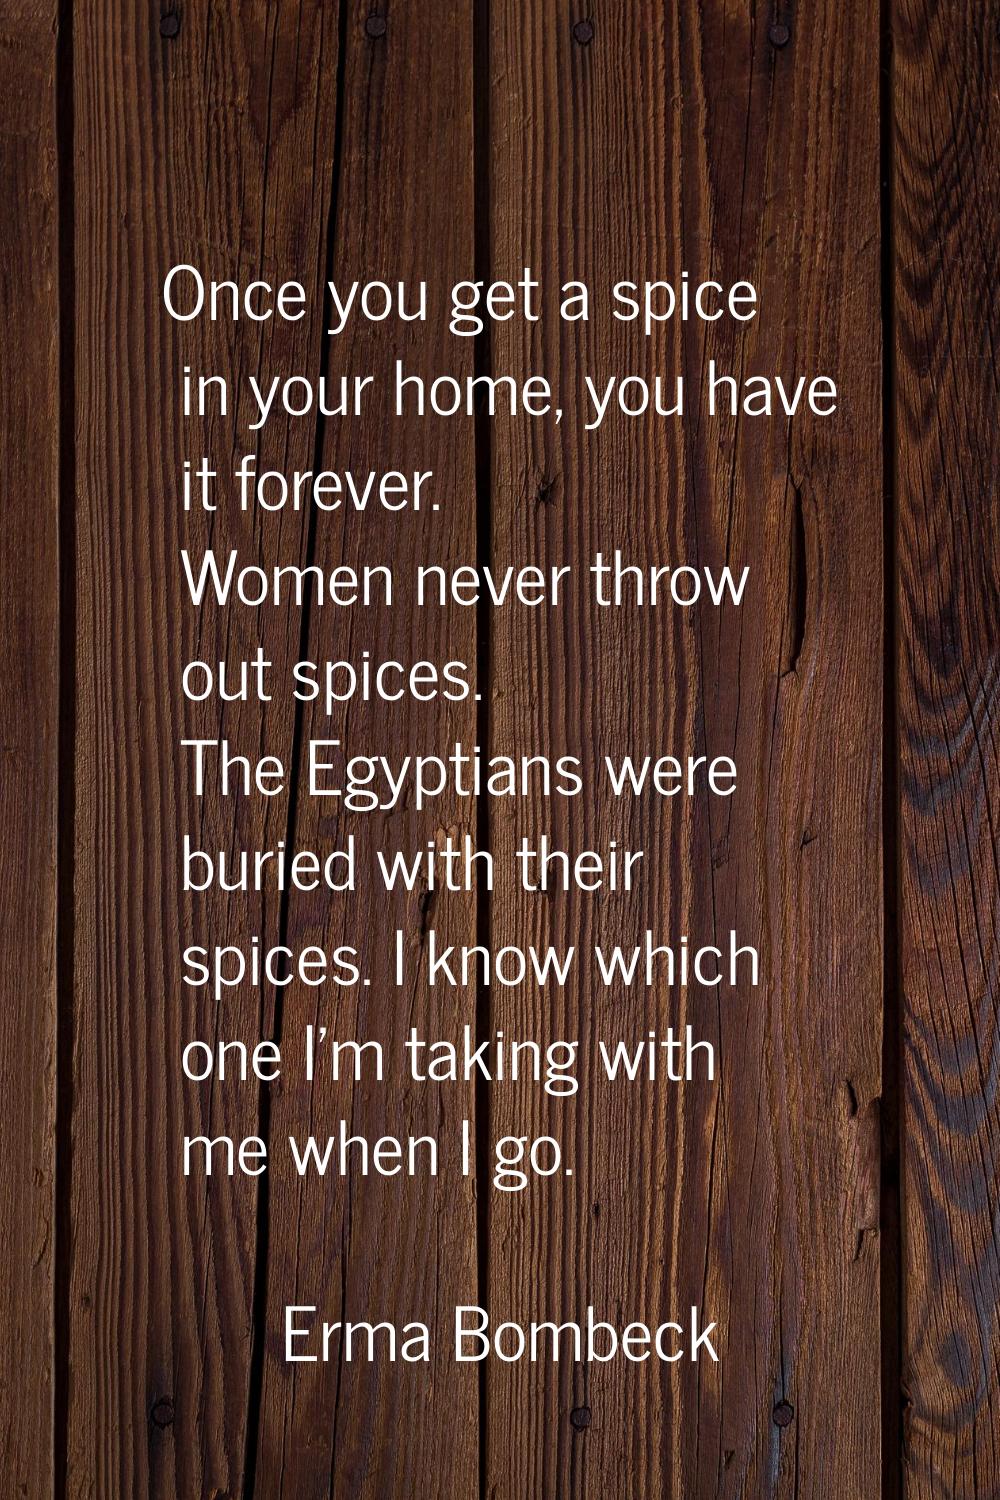 Once you get a spice in your home, you have it forever. Women never throw out spices. The Egyptians